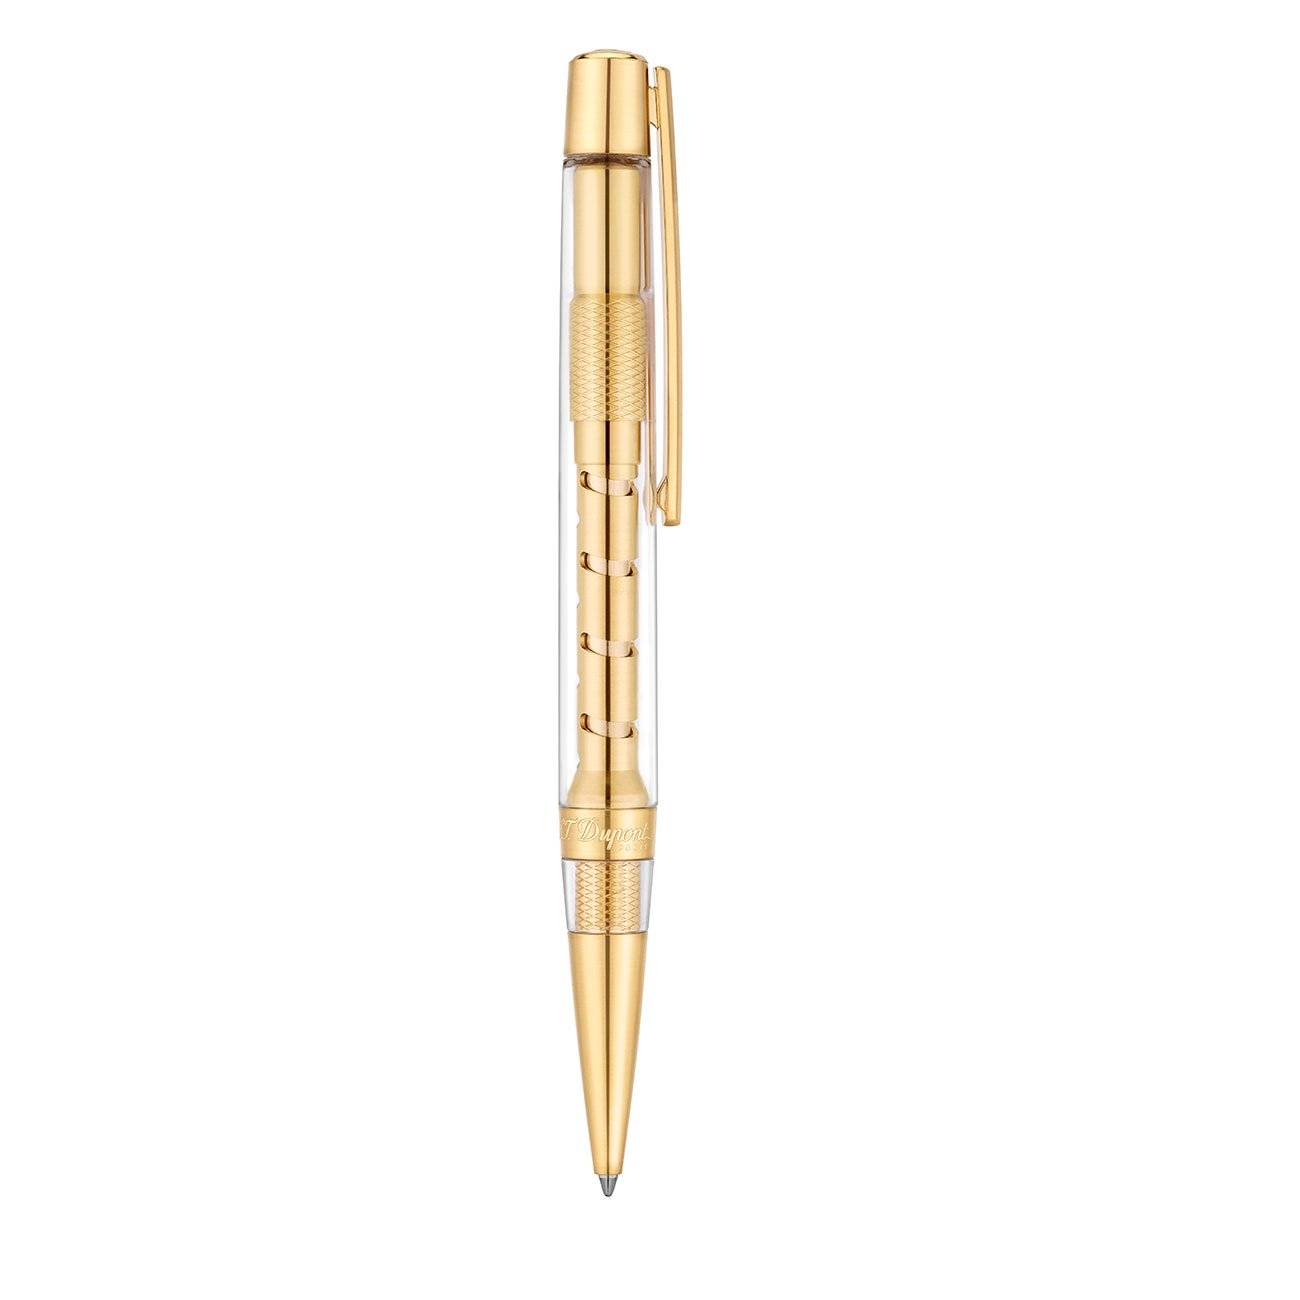 405726 COMPOSITE AND YELLOW GOLD FINISH BALLPOINT PEN